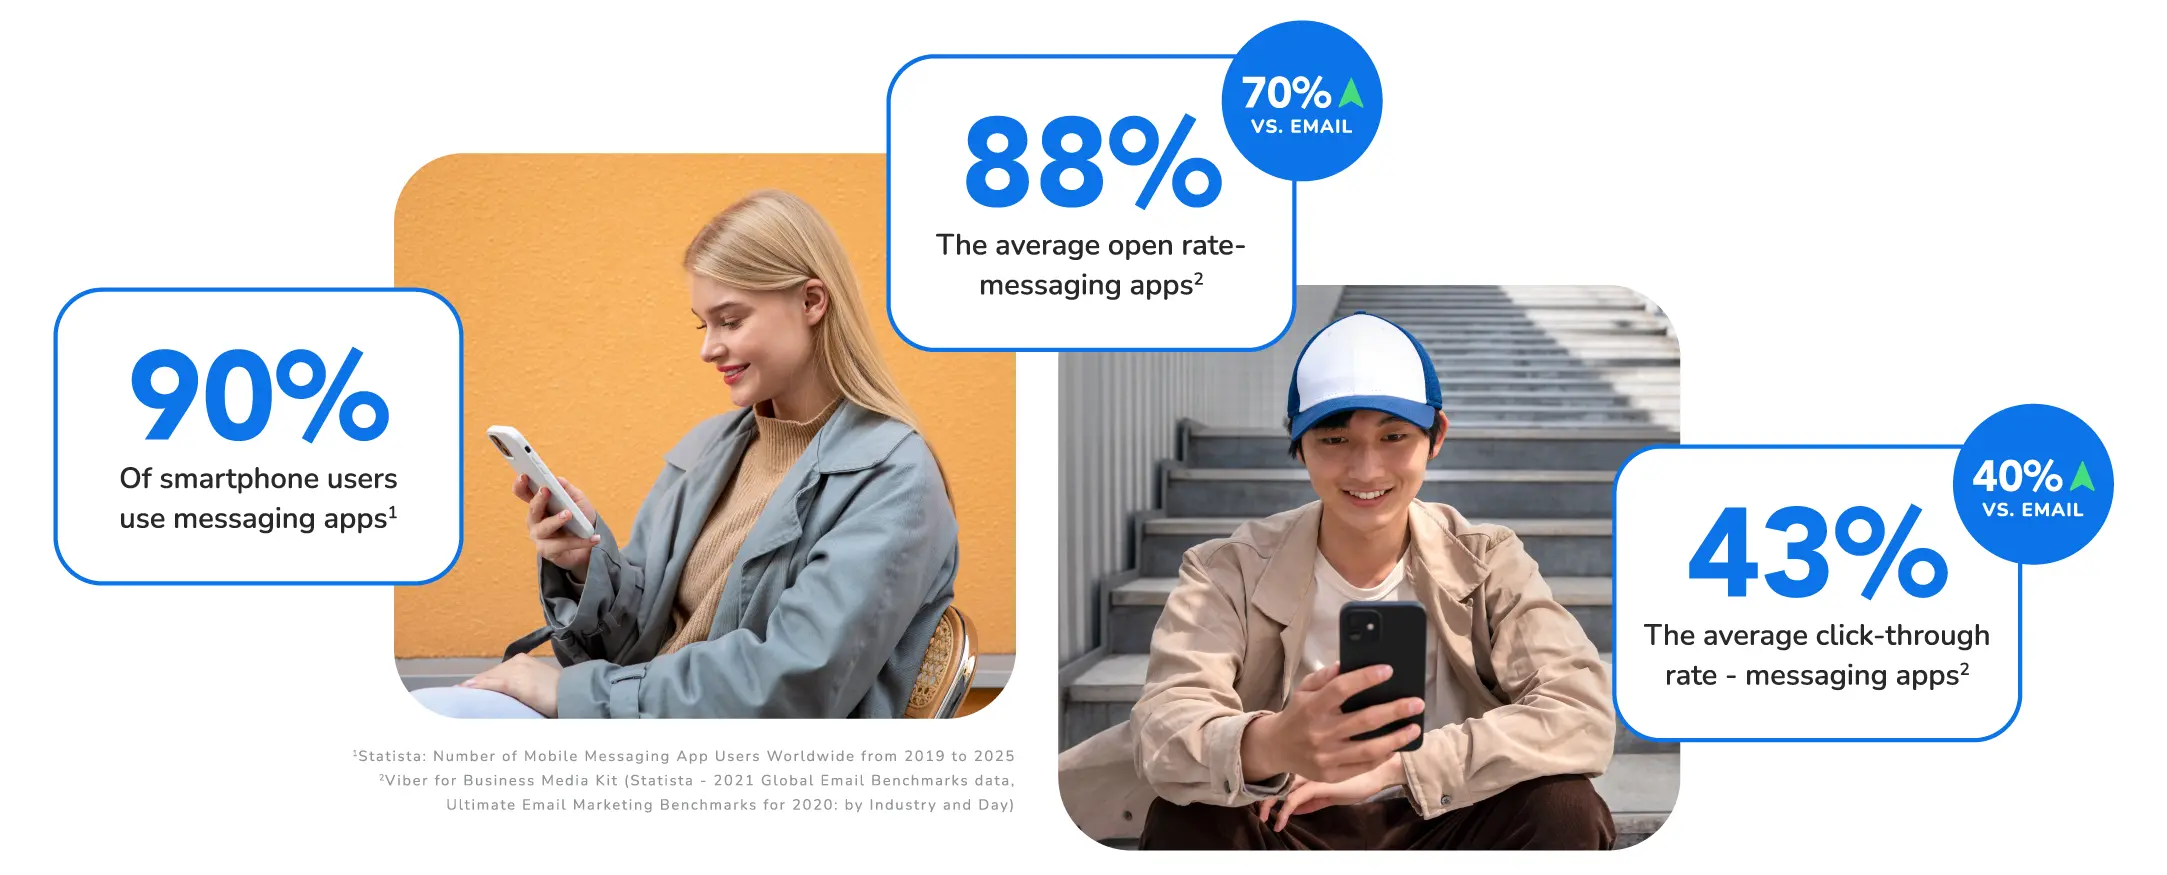 Consumers using messaging apps on their phones and data highlighting the power of messaging apps such as high open and click-through rates.